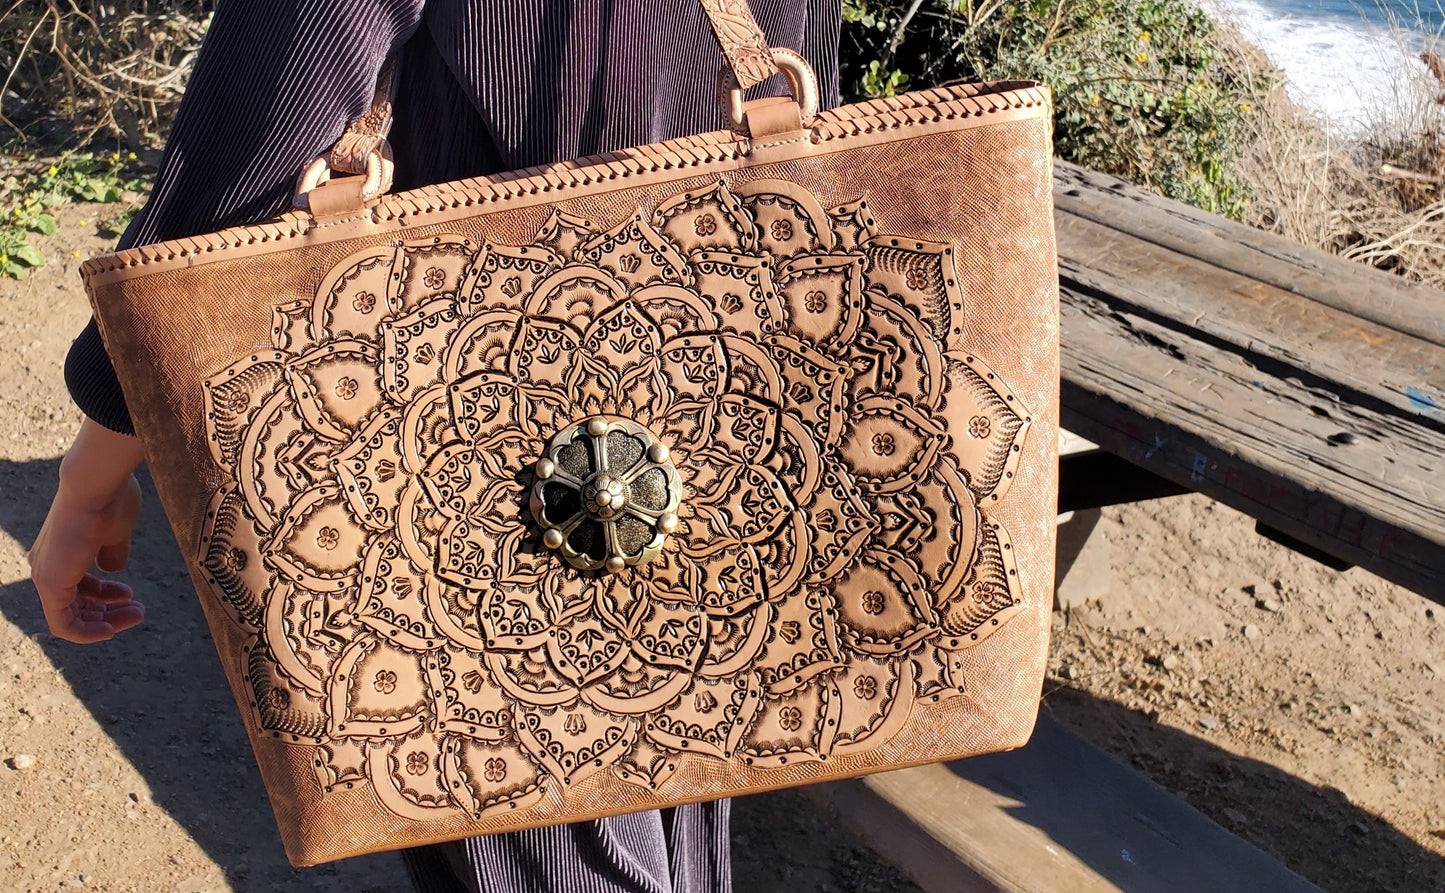 Hand Made Leather Tote Bag "MIA" by MIOHERMOSA Natural Mia Swirls Middle